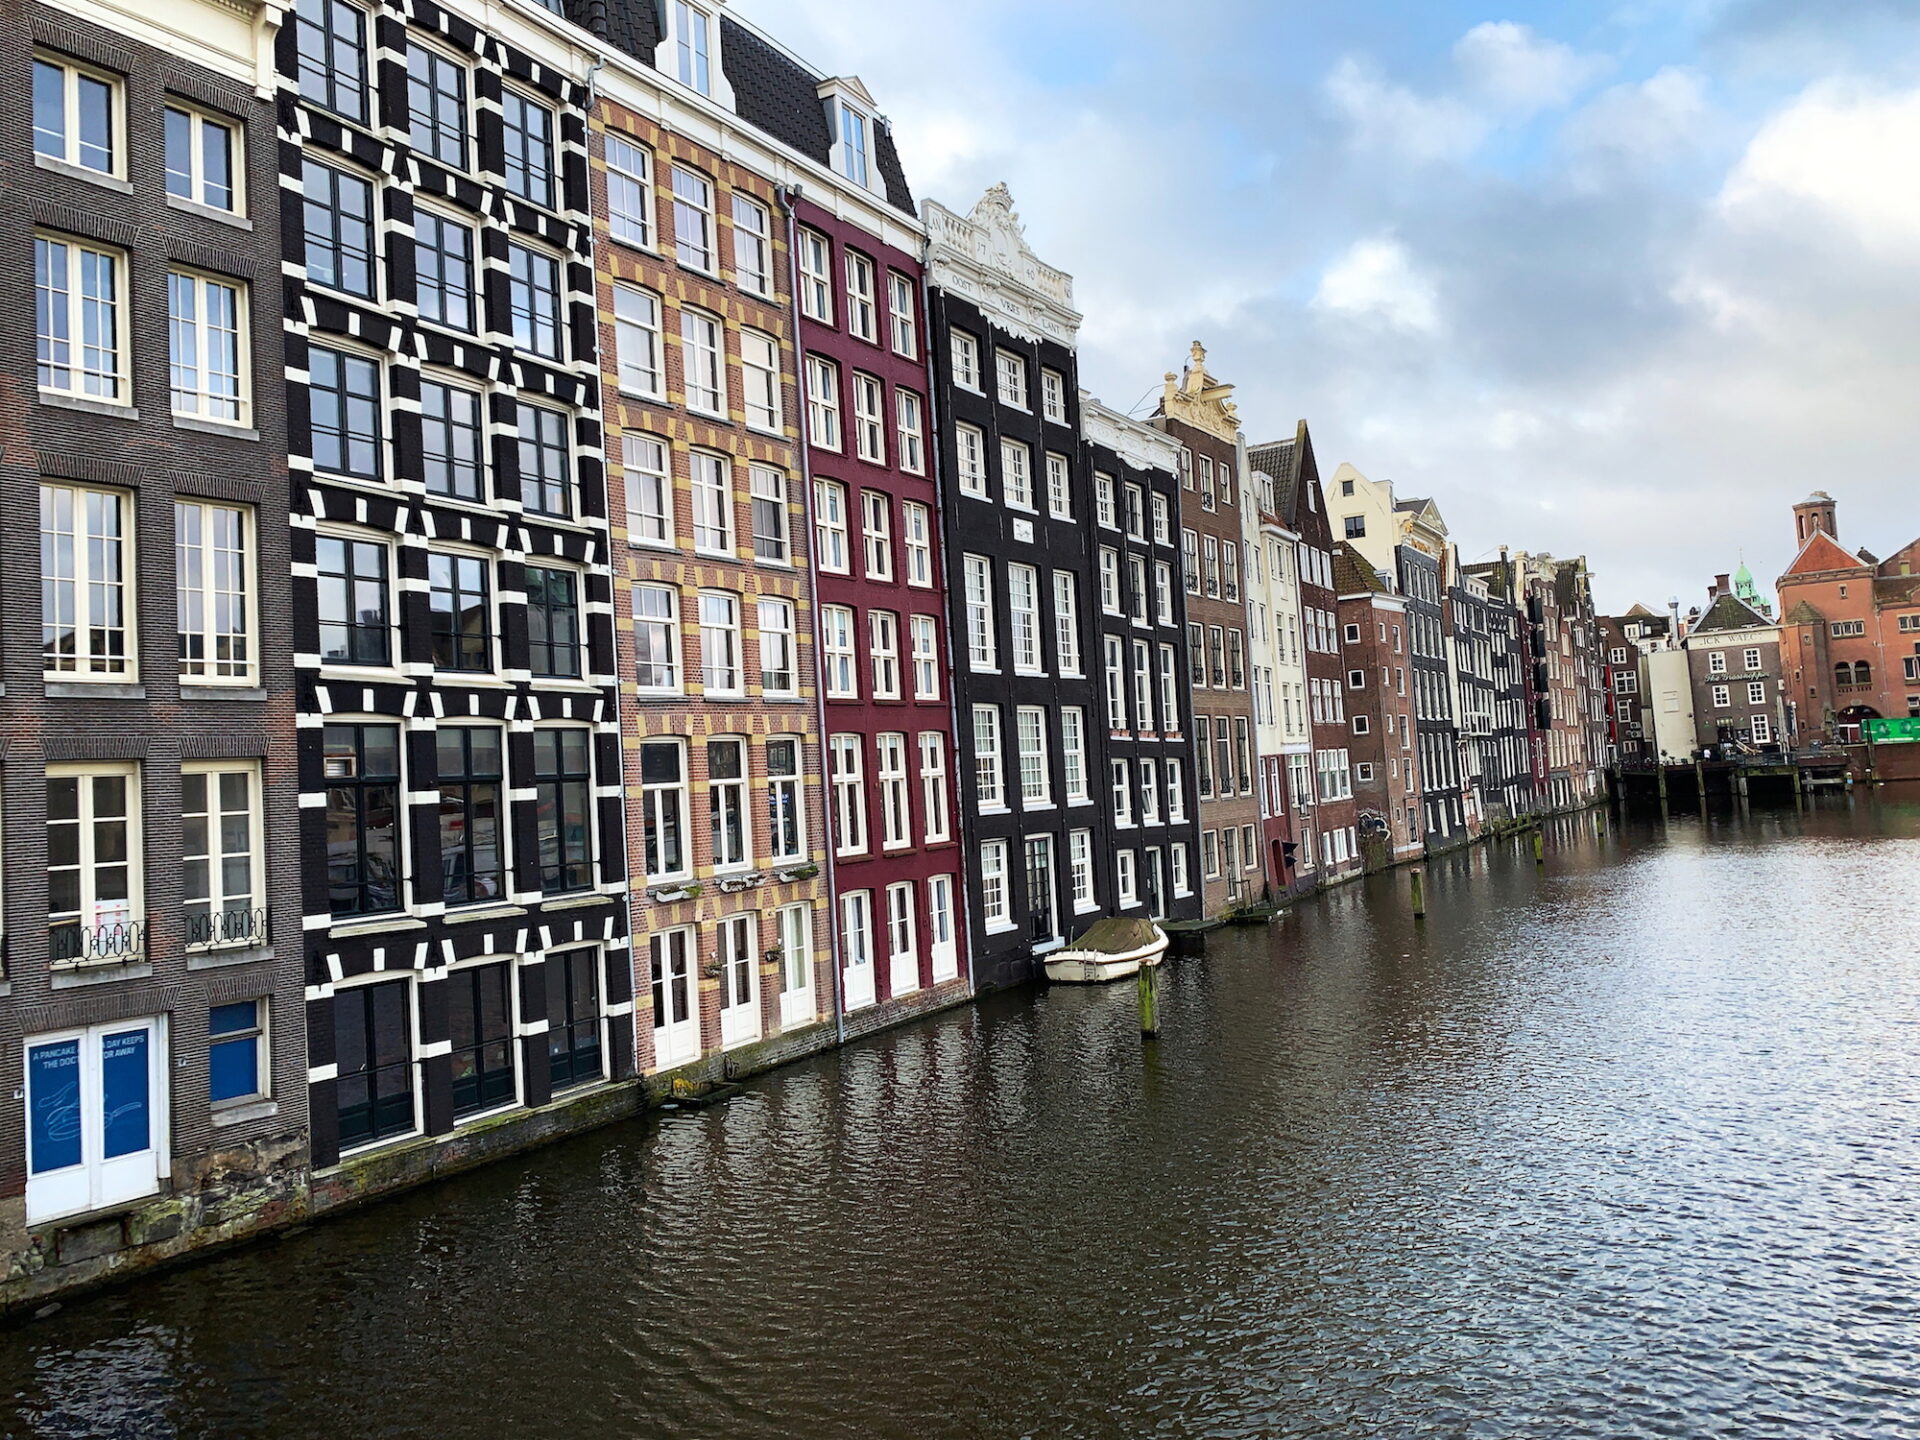 One Day in Amsterdam – A First Timer’s Itinerary